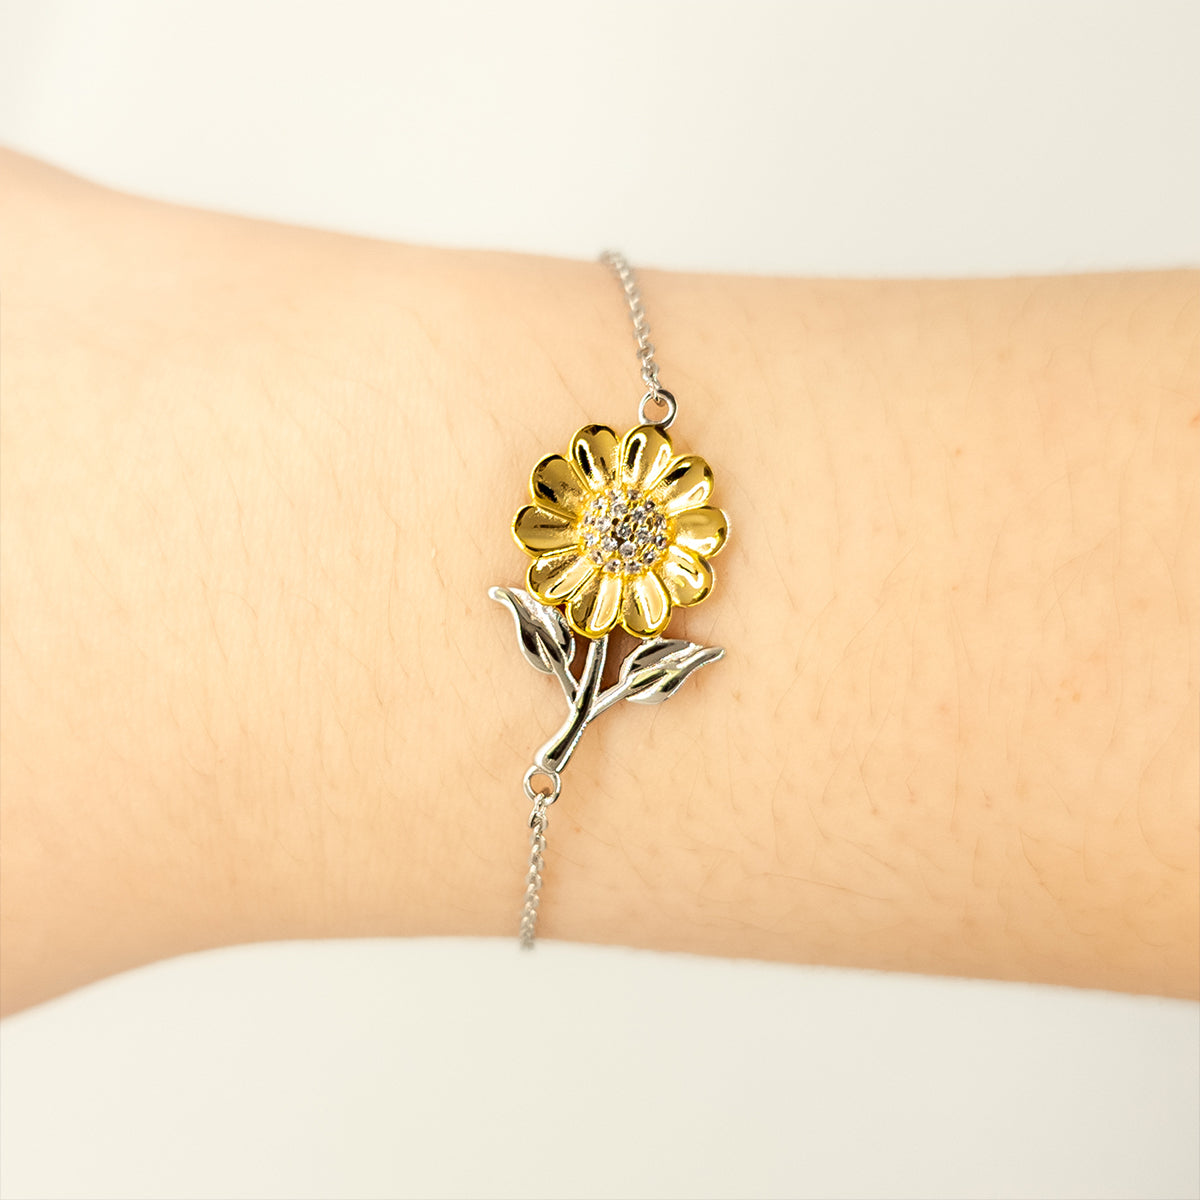 Funny Personal Care Aide Mom Gifts, The best kind of MOM raises Personal Care Aide, Birthday, Mother's Day, Cute Sunflower Bracelet for Personal Care Aide Mom